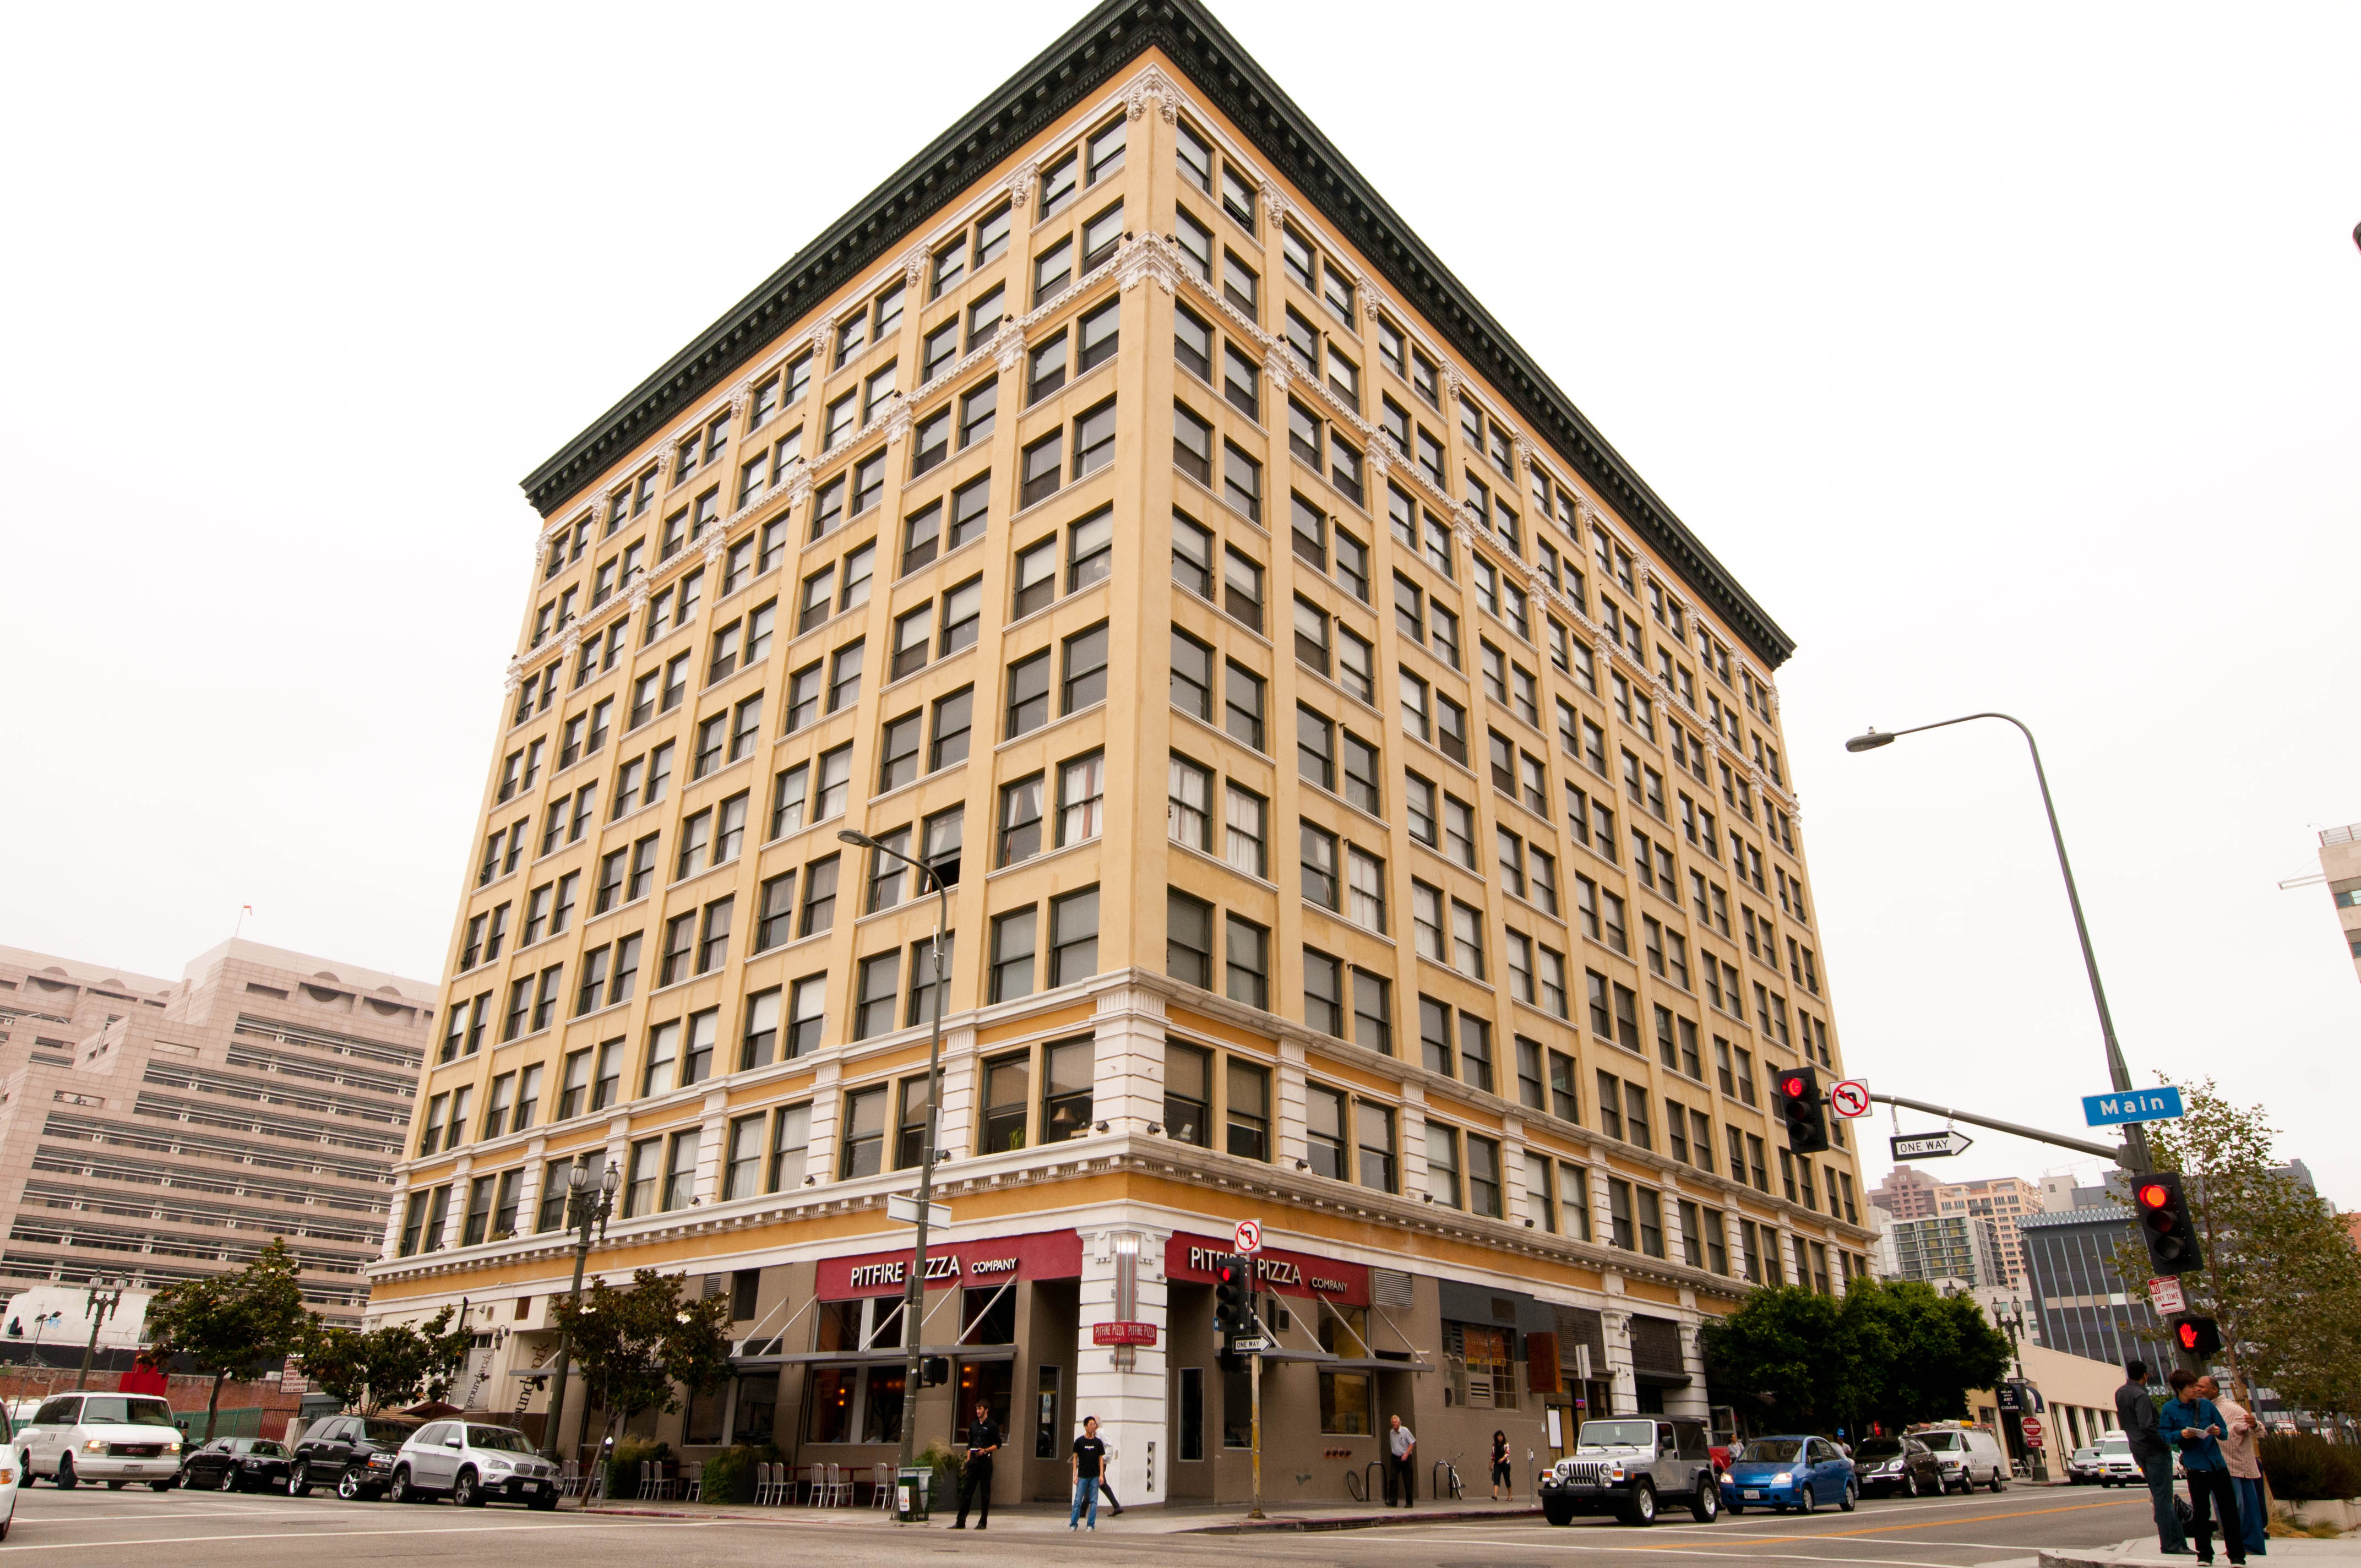 Downtown Los Angeles Loft | Downtown Los Angeles Lofts For Sale | Condos For Sale In DTLA